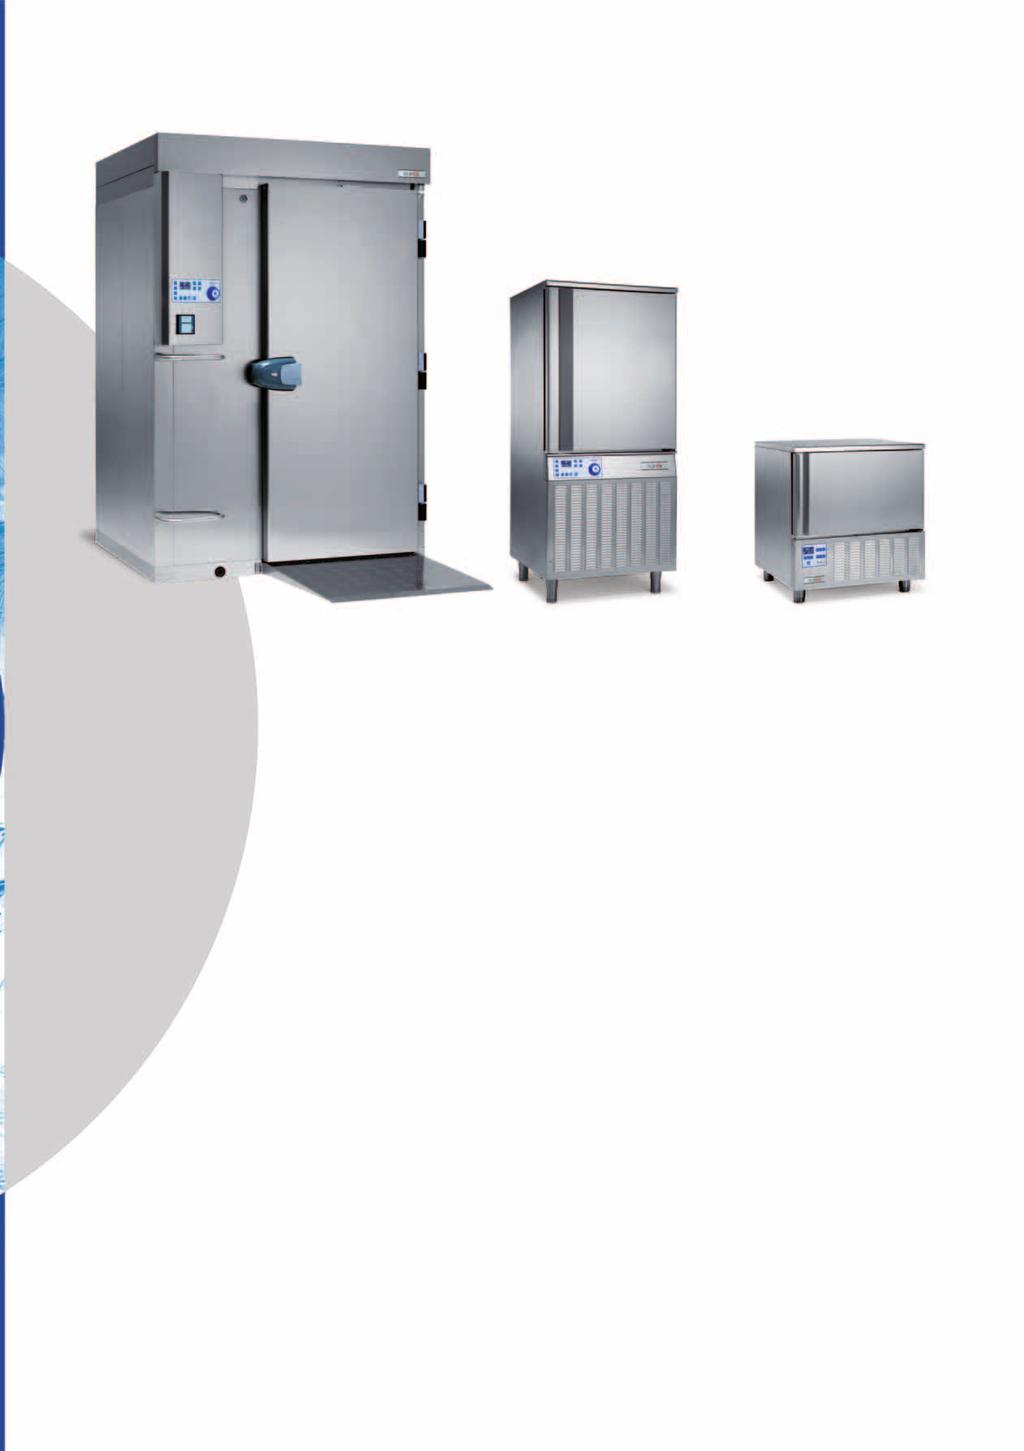 rs and freezers Technology at the service of hygiene, safety and quality. In the professional catering industry, food safety must be considered a priority above all others.